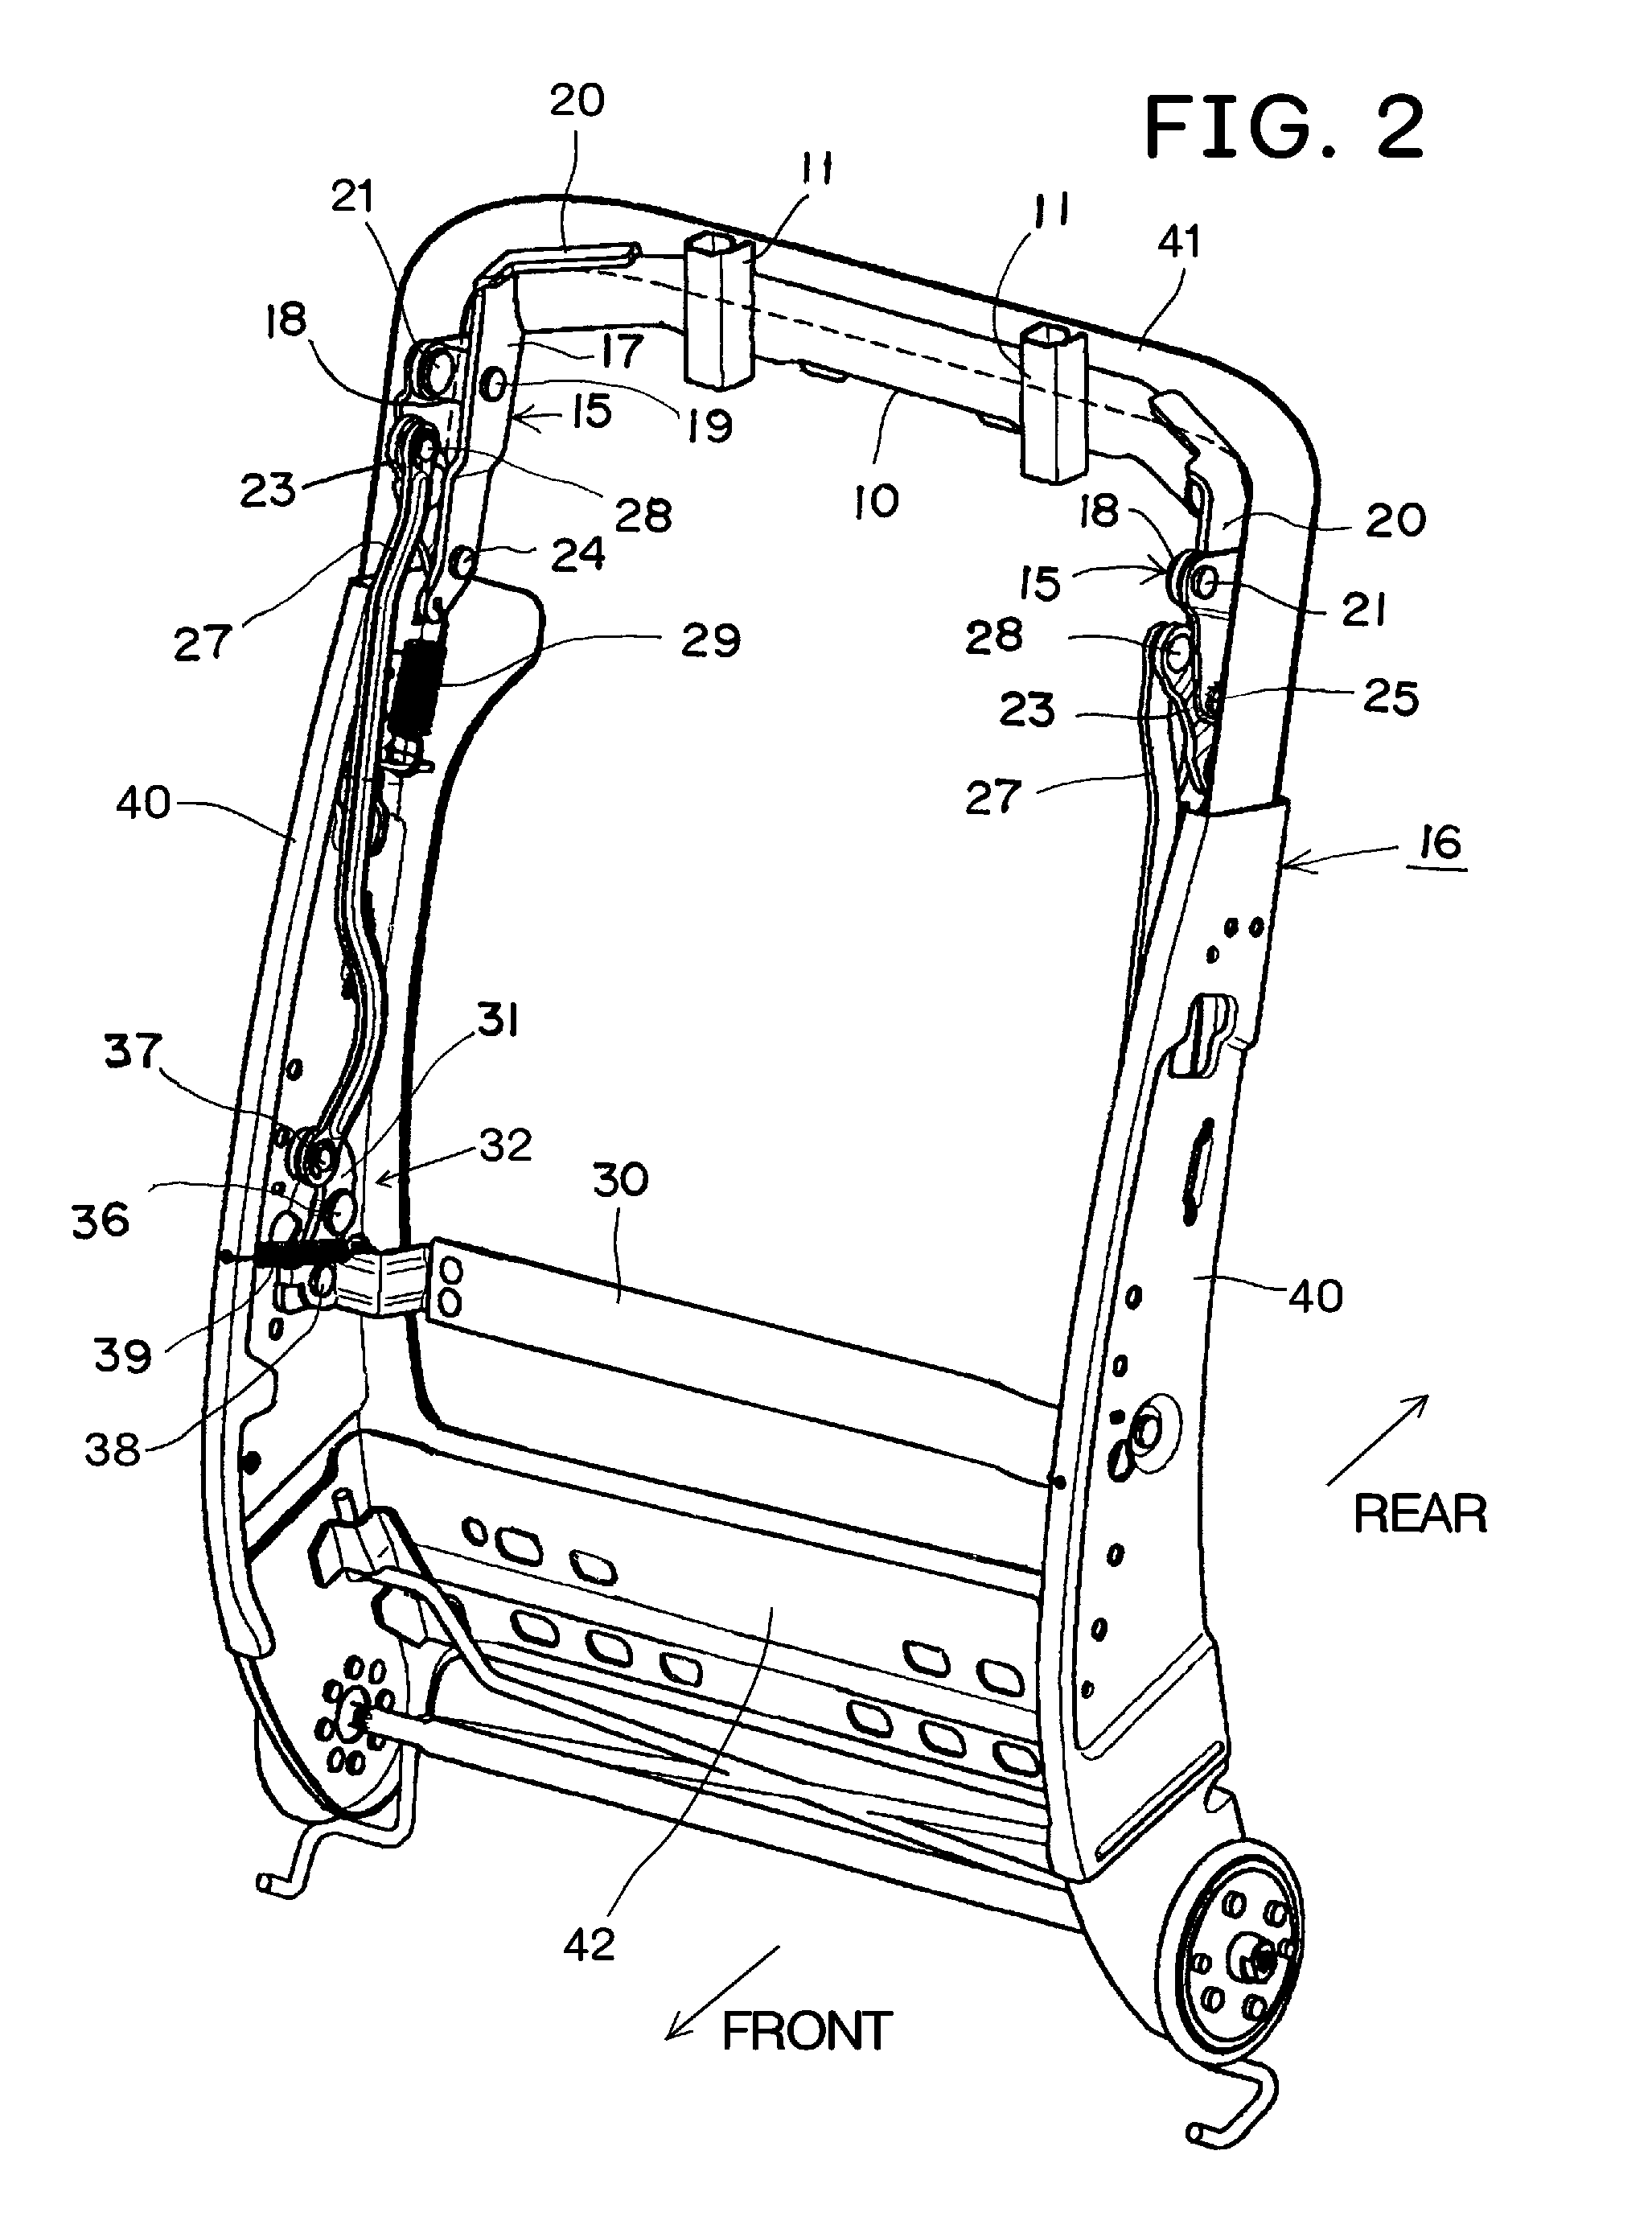 Coupling mechanism for headrest of vehicle seat